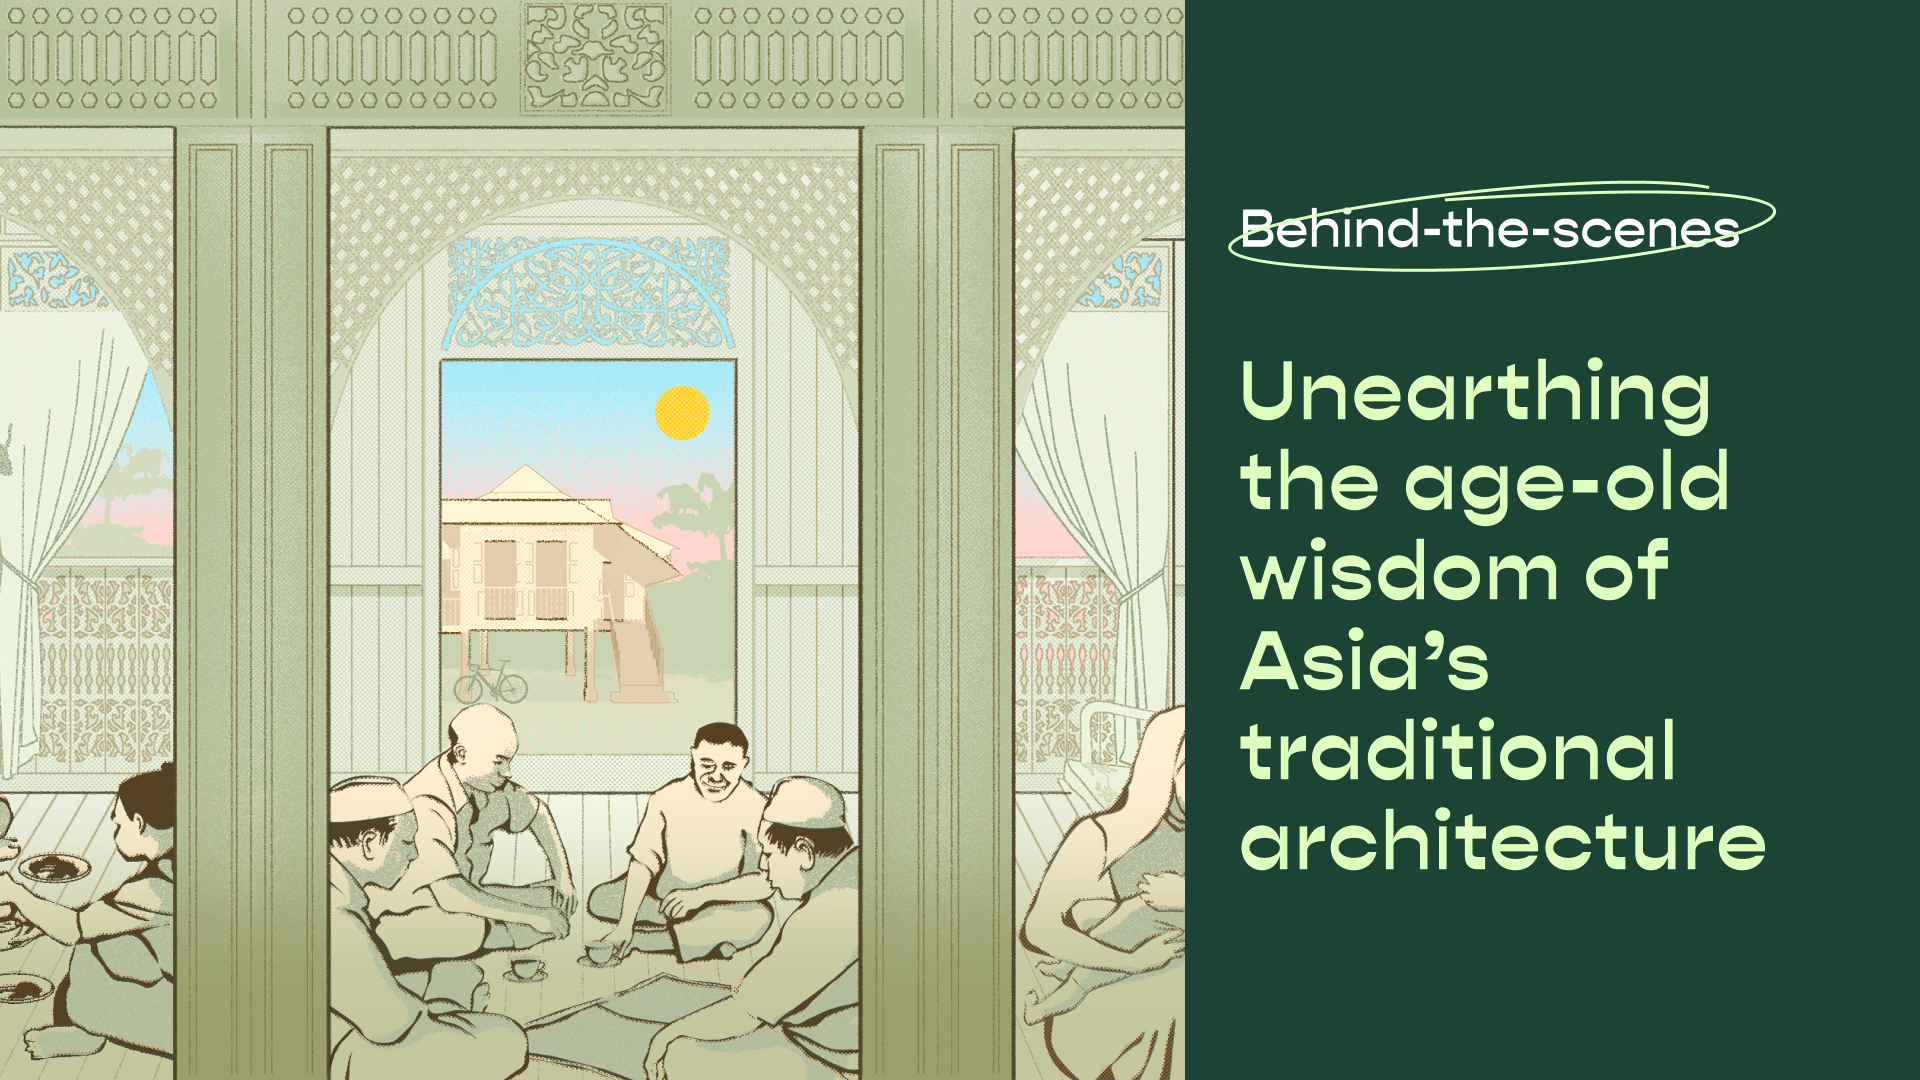 Behind-the-scenes: Unearthing the age-old wisdom of Asia's traditional architecture